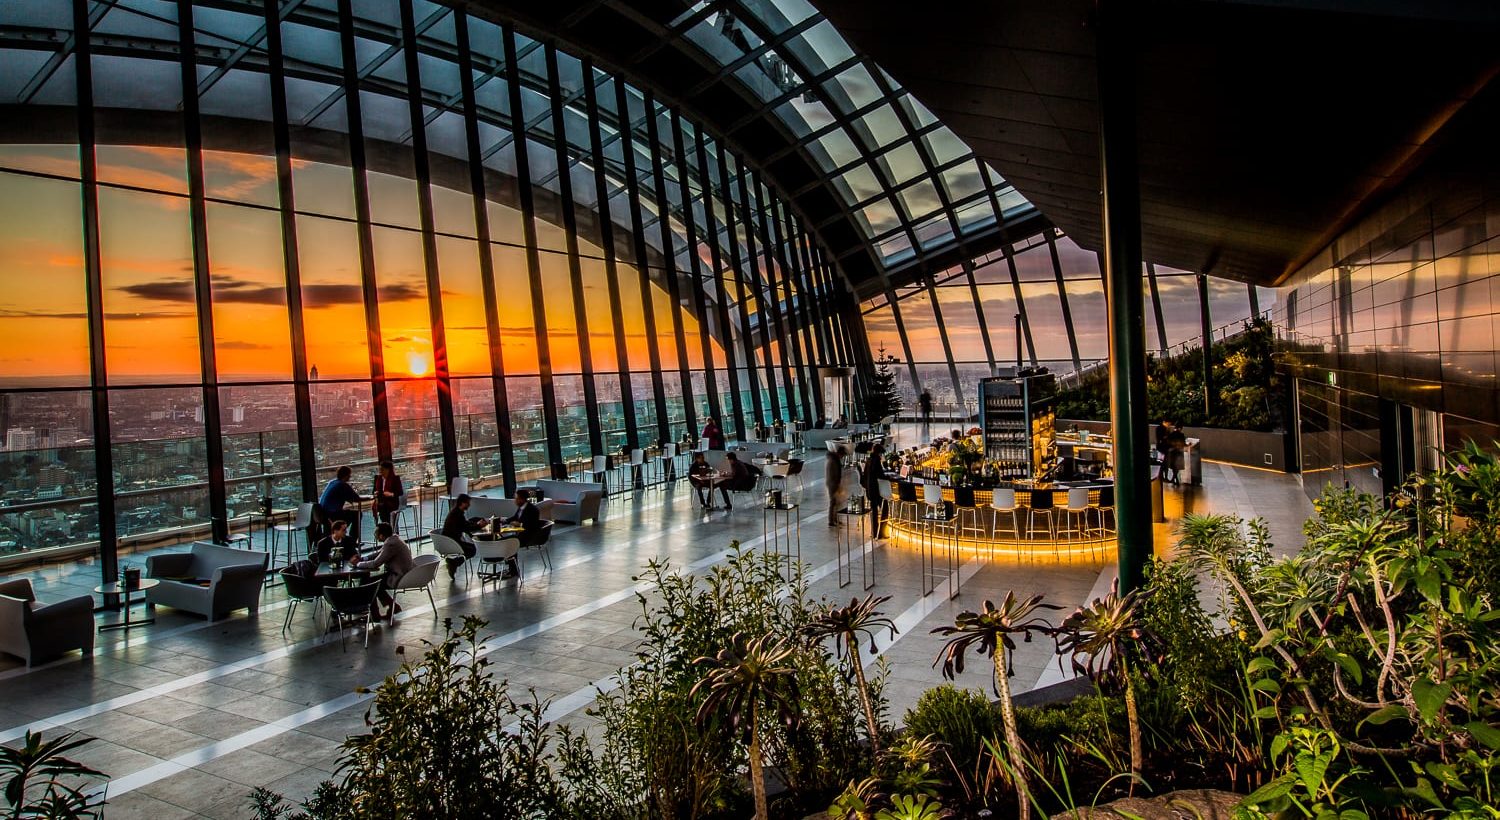 View of the Sky Garden overlooking London at sunset. Plants and greenery for decoration and small bar with seating area